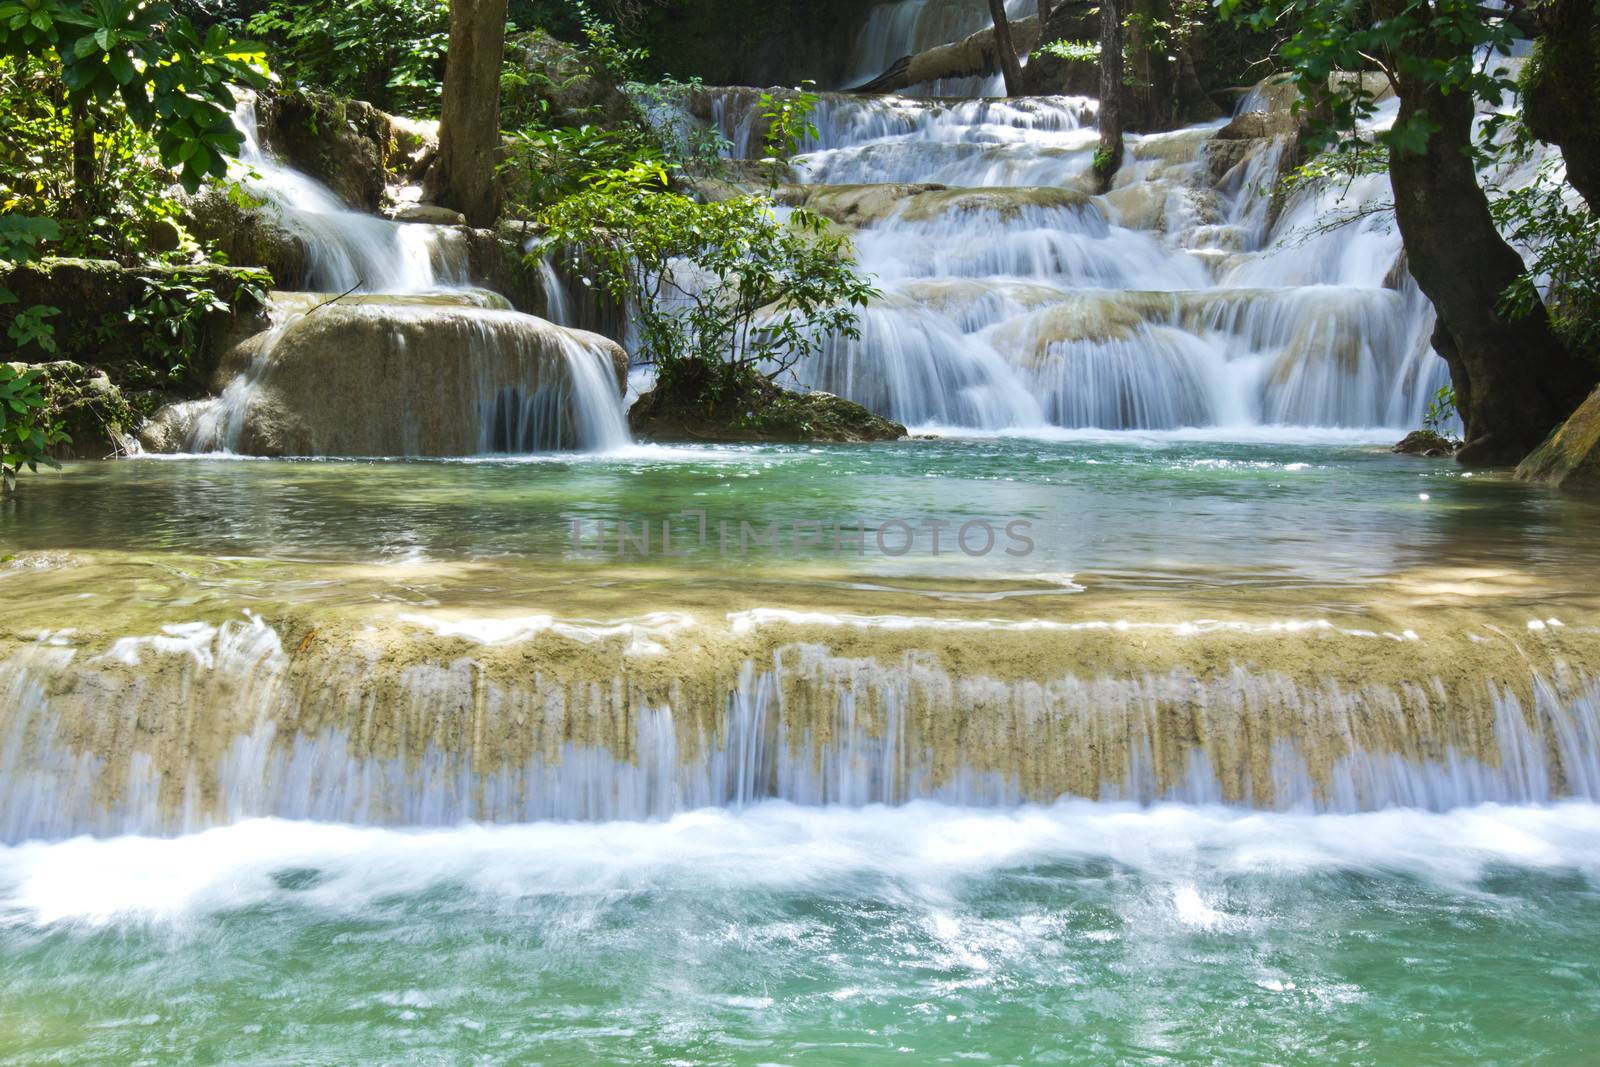 Some part of the seven layer waterfall in Erawan waterfall